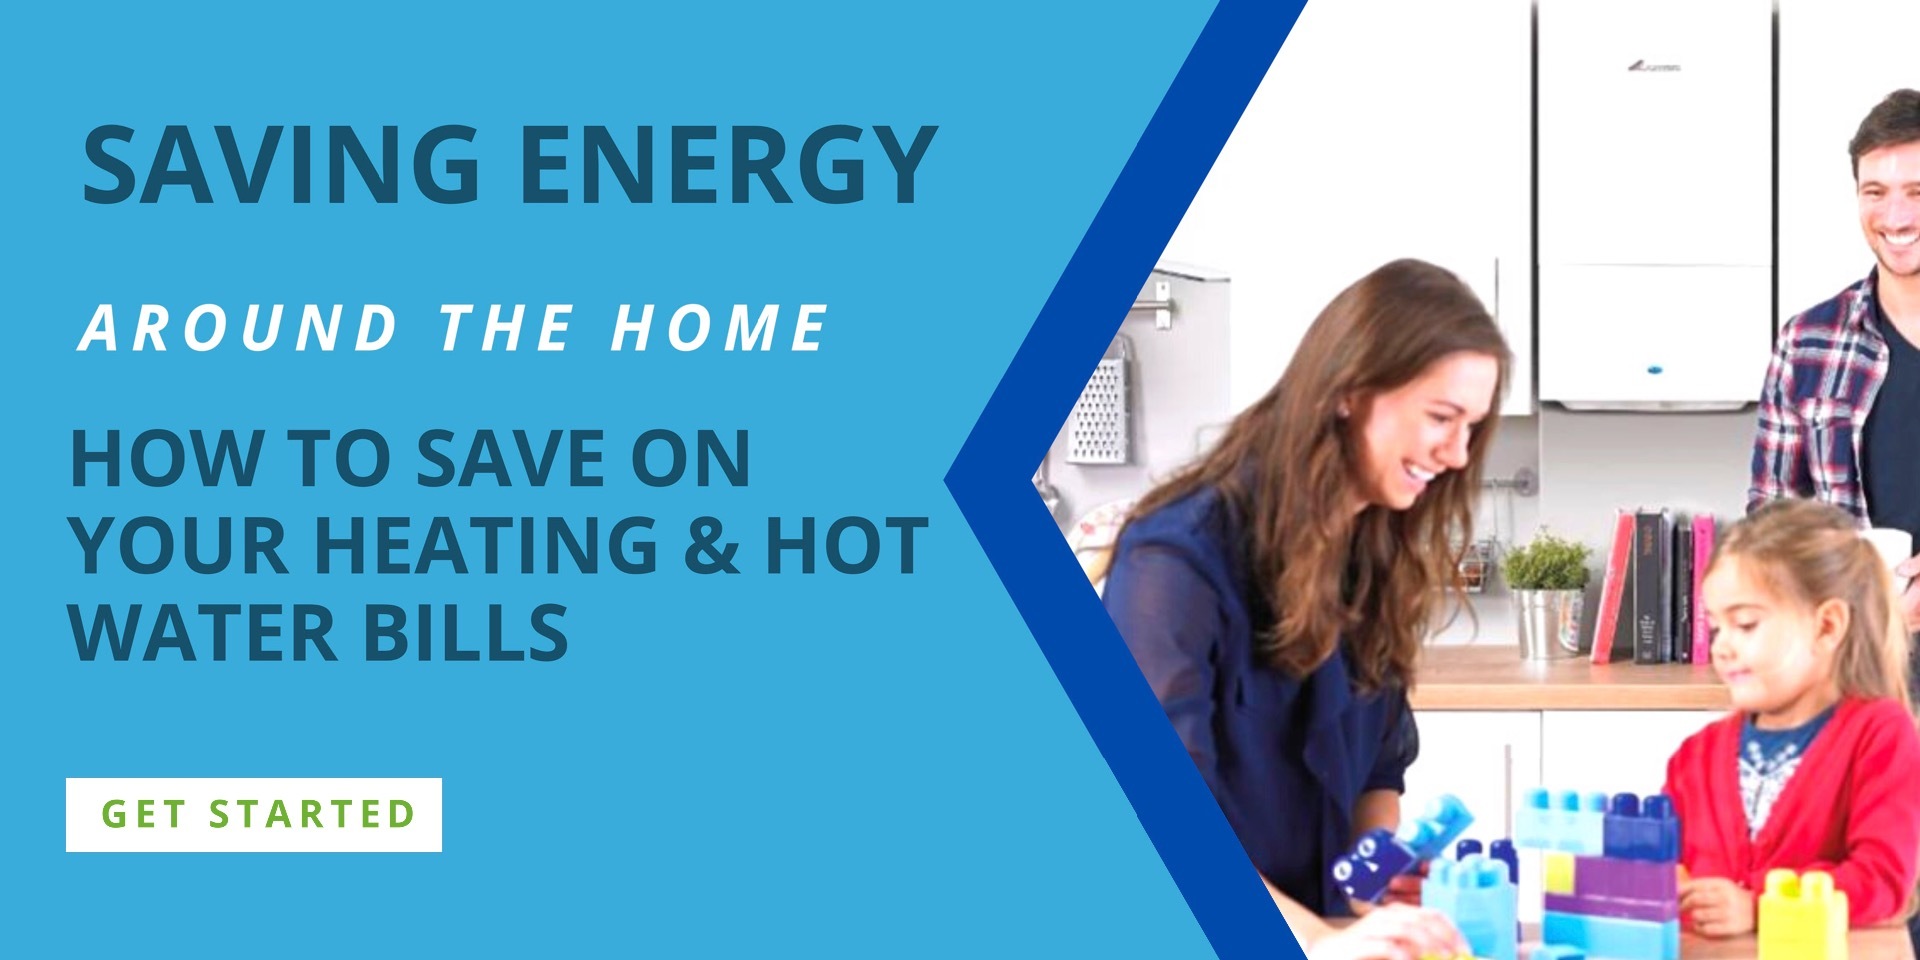 Saving energy around the home, click to get started